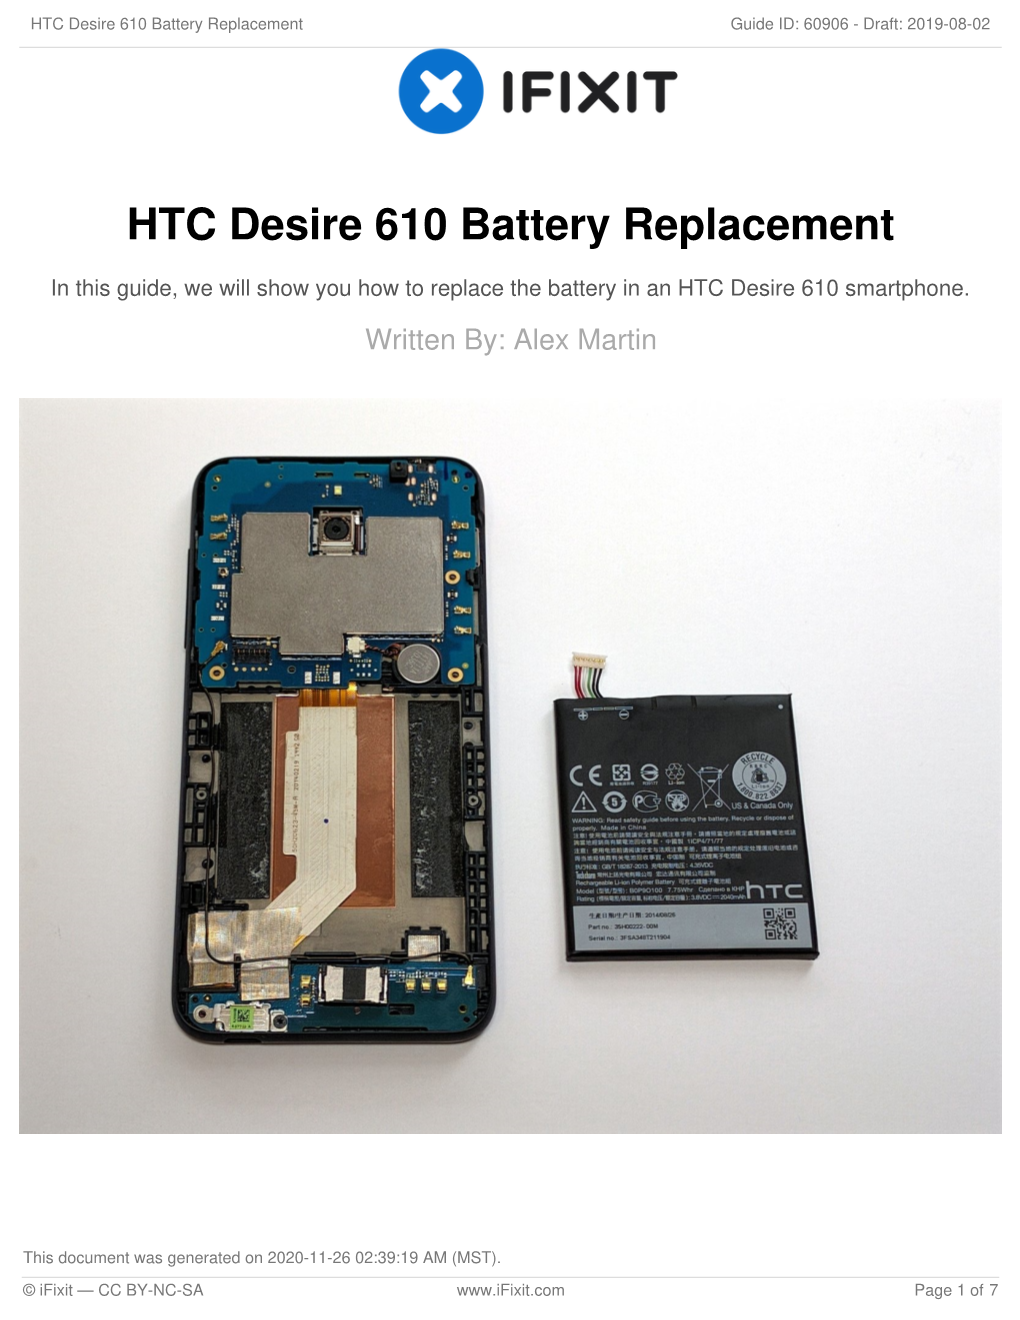 HTC Desire 610 Battery Replacement Guide ID: 60906 - Draft: 2019-08-02